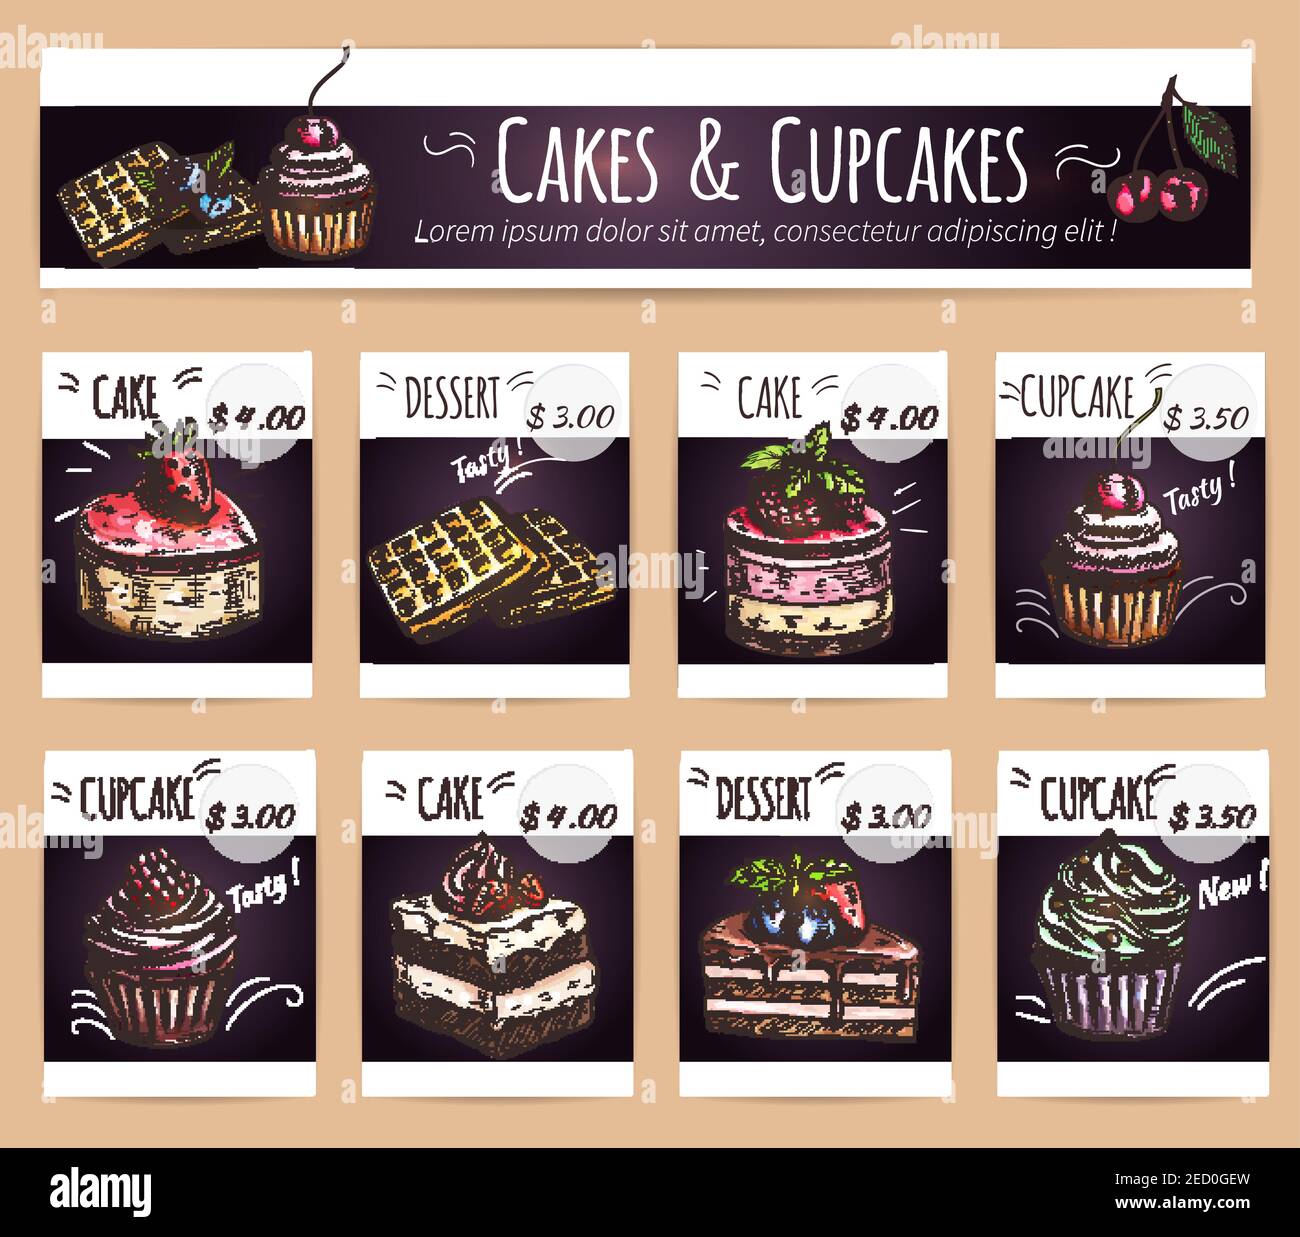 Check our Updated Cake Menu!🎂 .... - Bryan's Cake House | Facebook